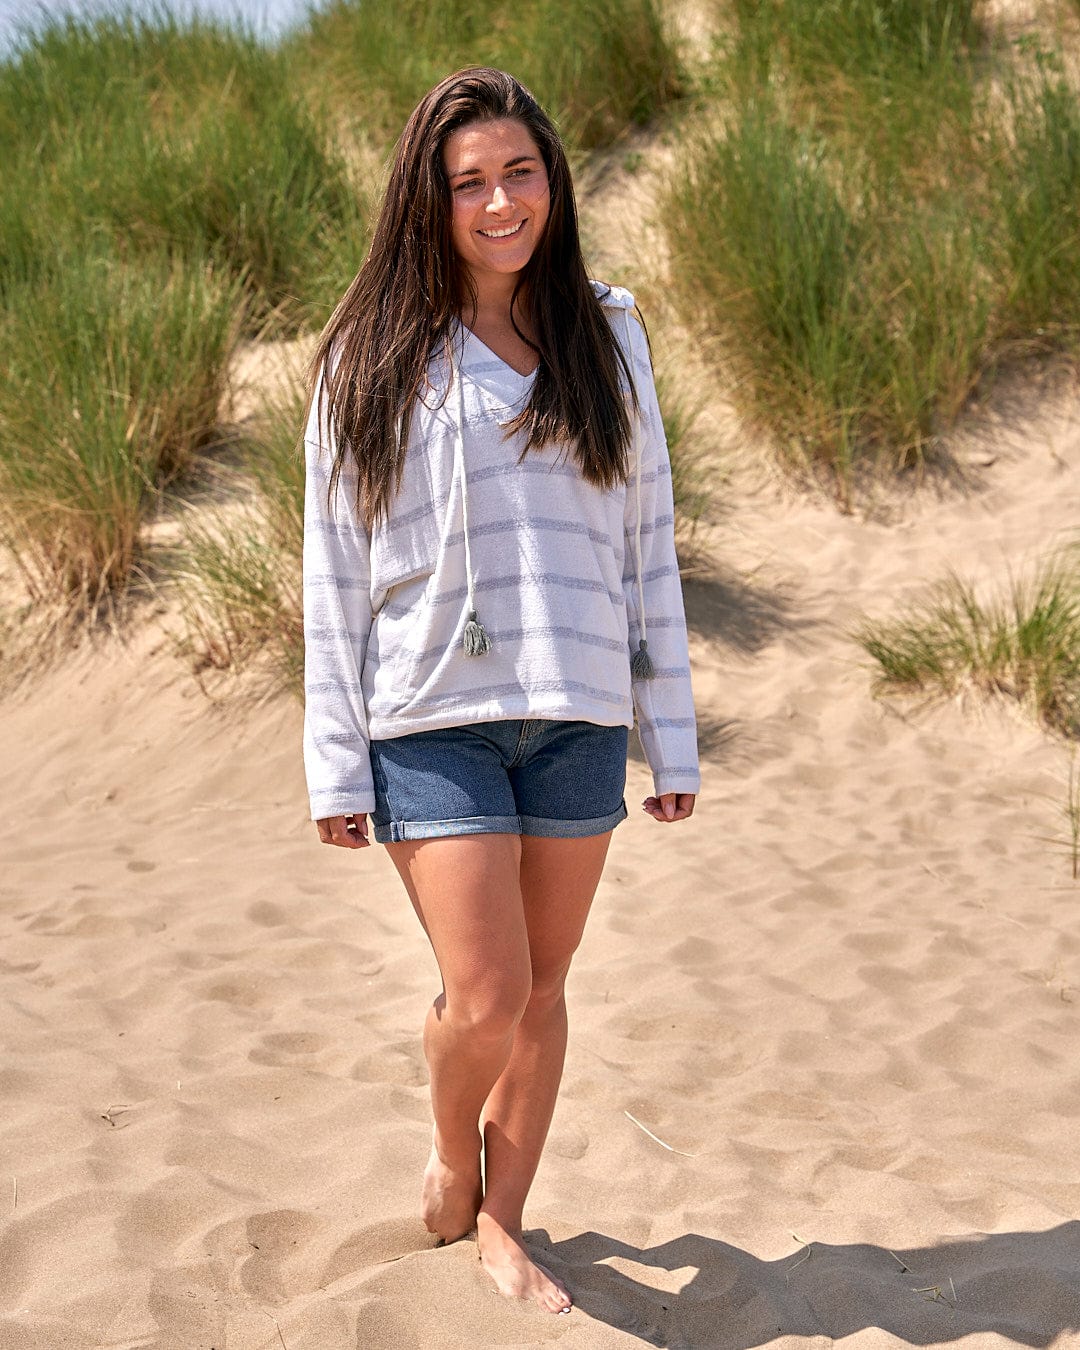 A girl standing on a sand dune wearing the Saltrock Kennedy - Womens Pop Hoodie in Cream and shorts.